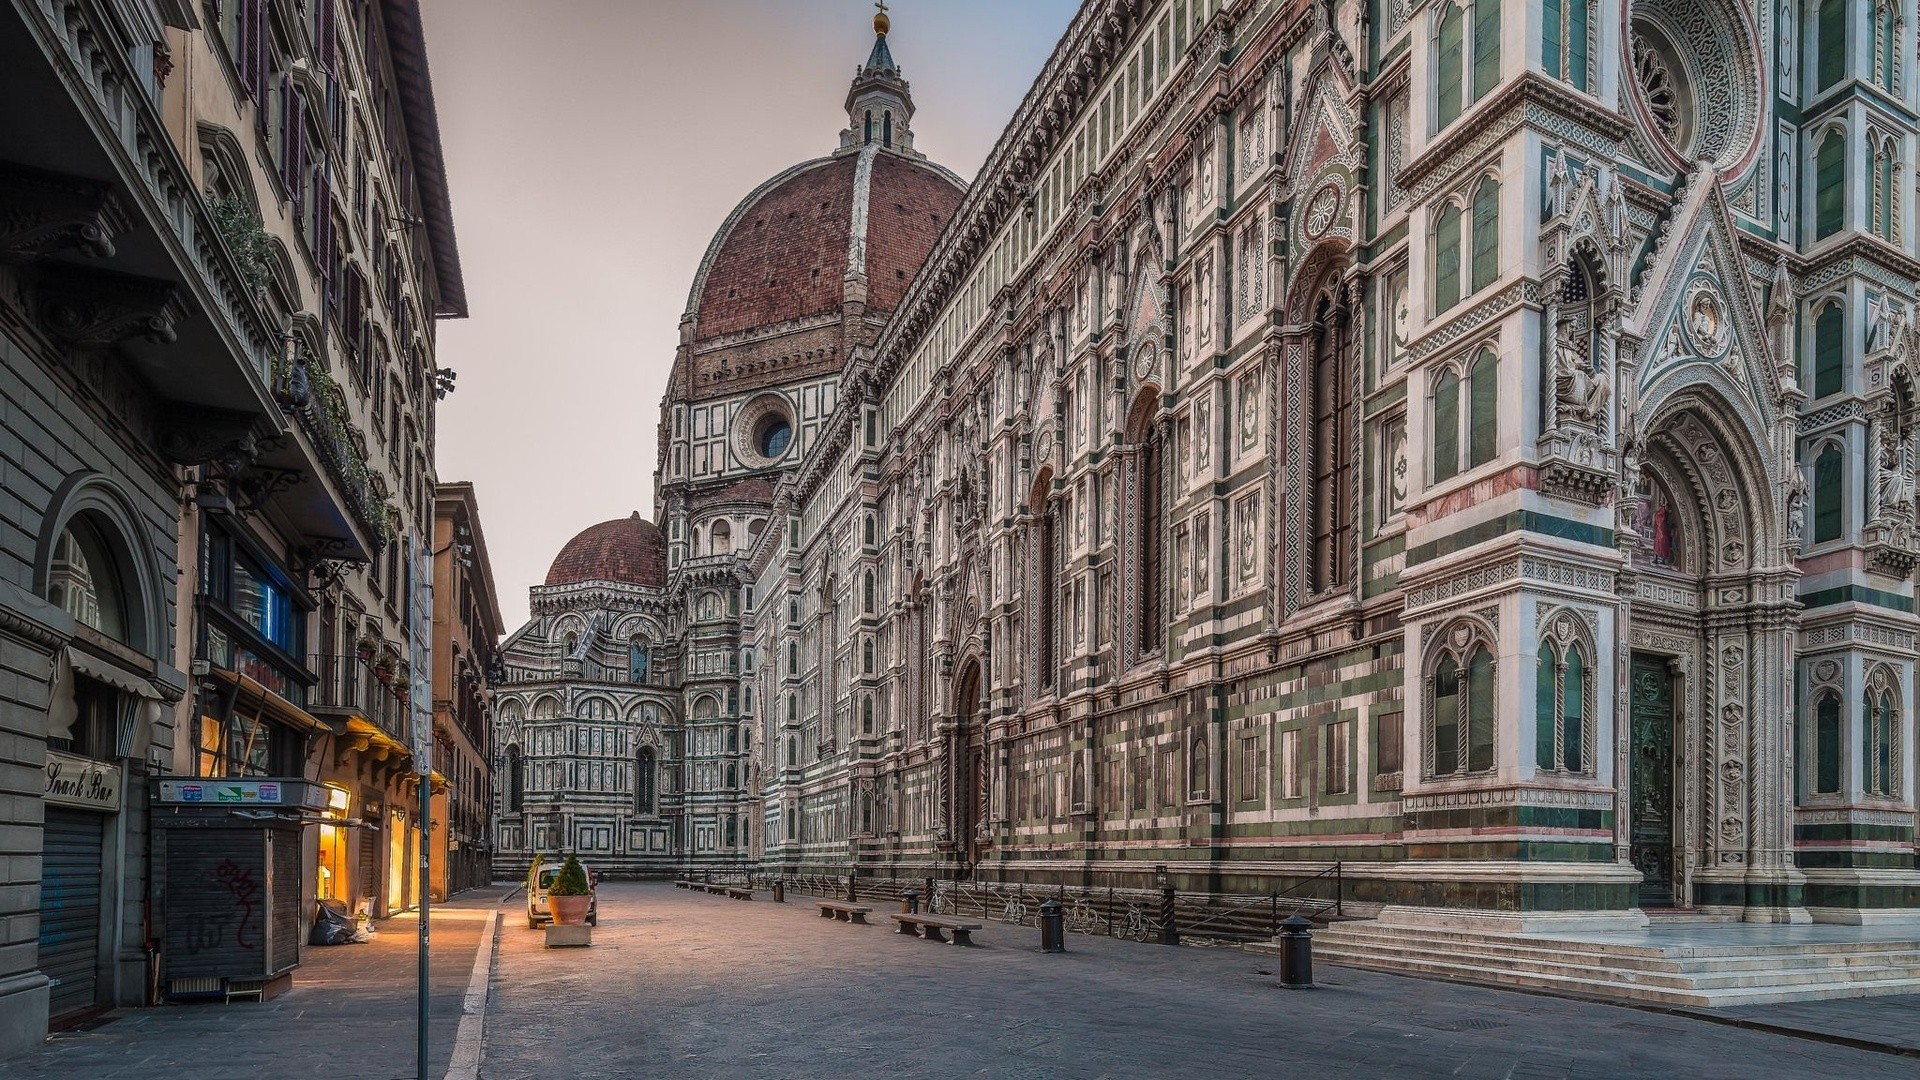 Architecture Old Building Town Street Urban Florence Italy Lights Cathedral Arch Gothic Architecture 1920x1080